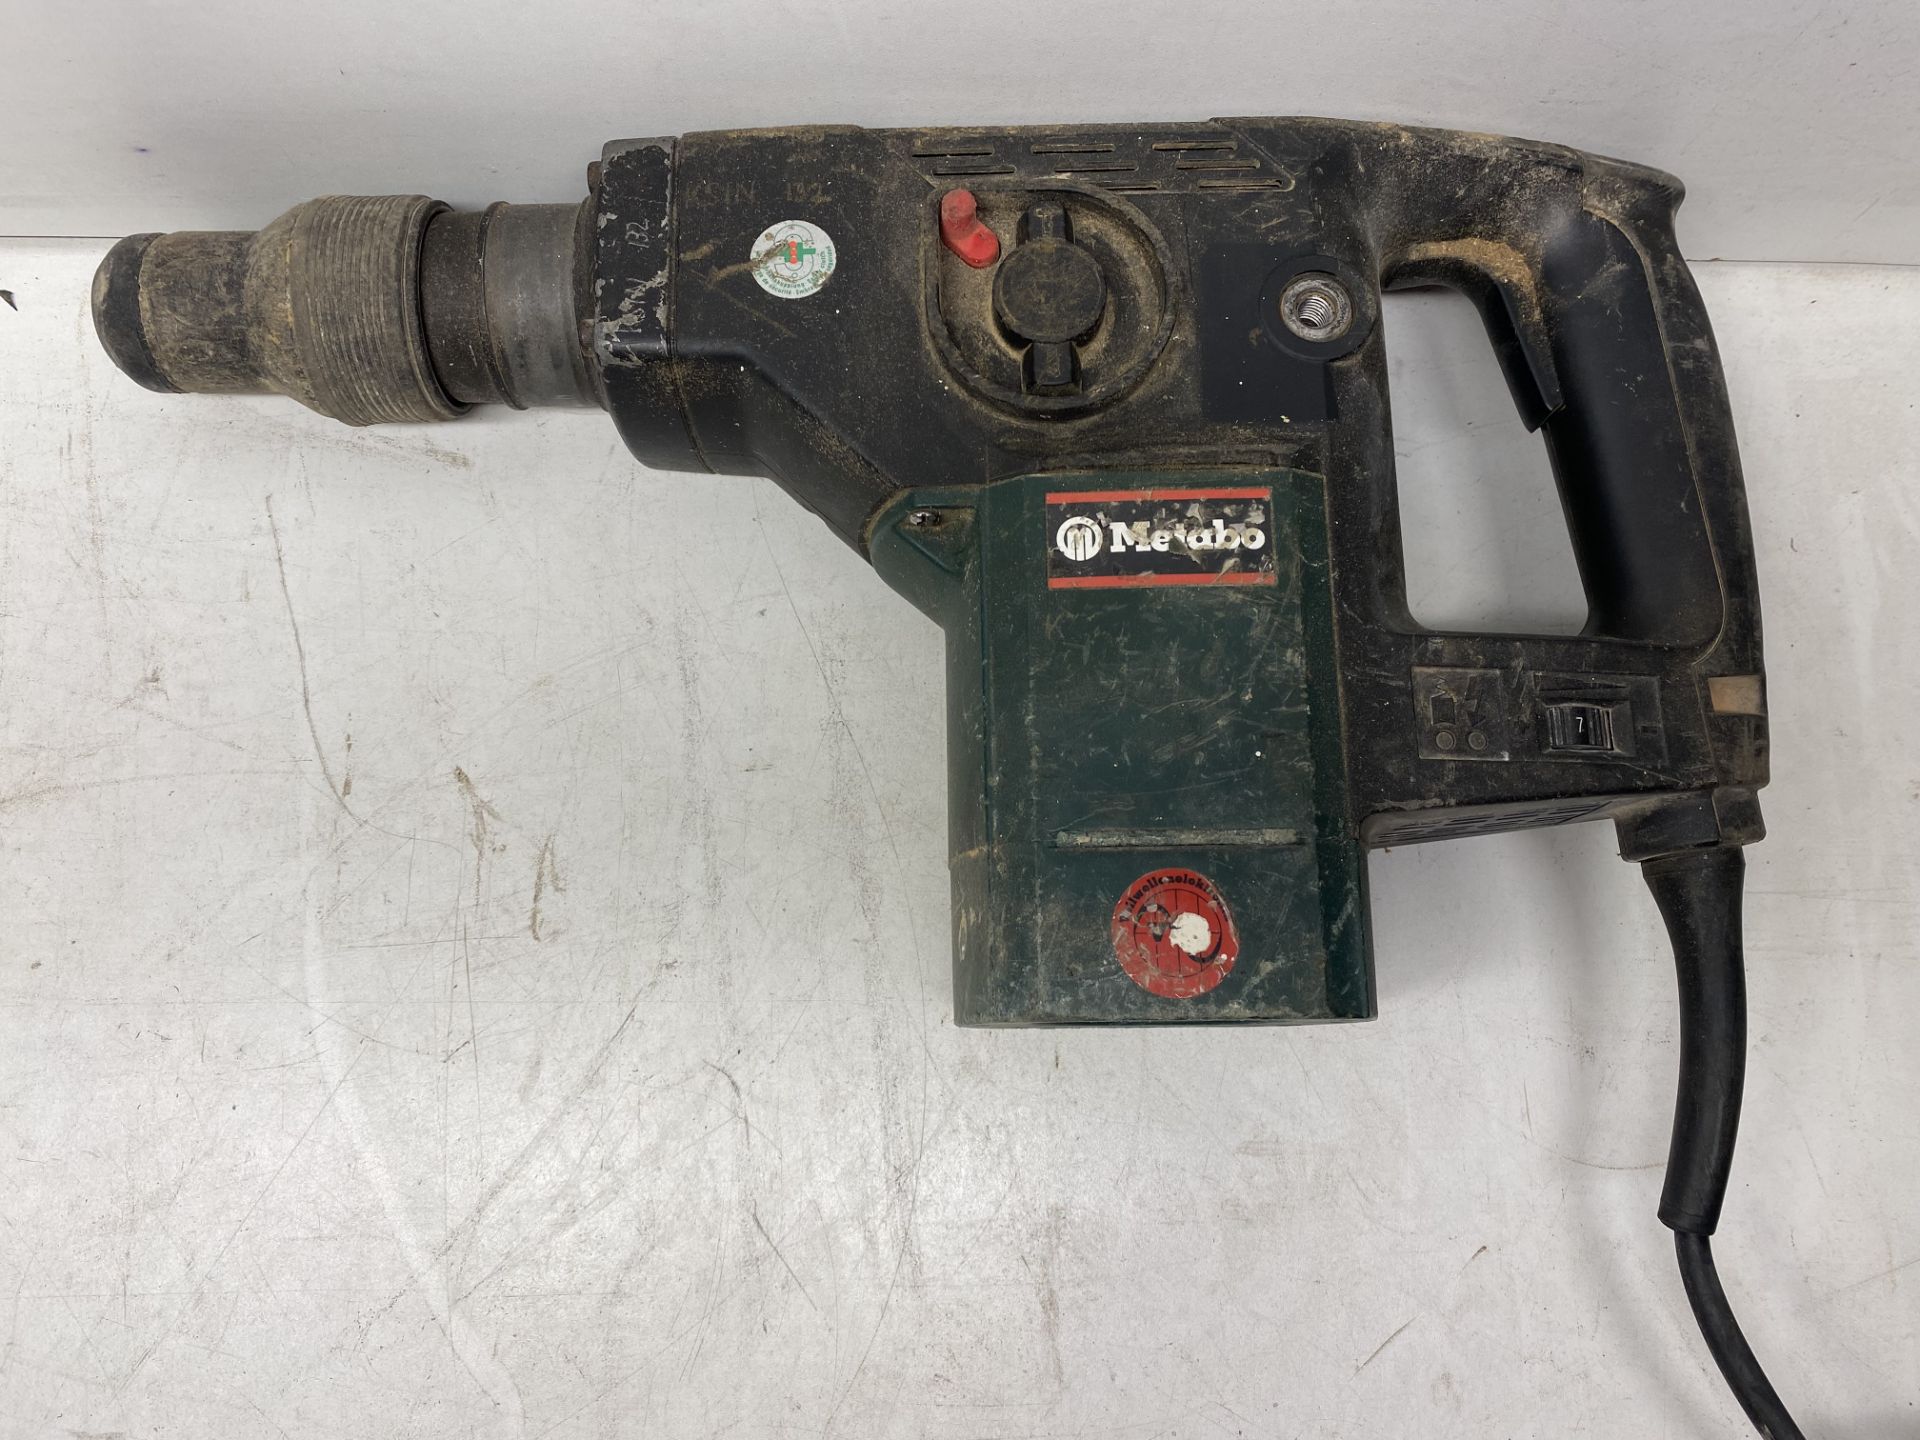 Metabo D-72622 SDS Rotary Hammer Drill - Image 3 of 9